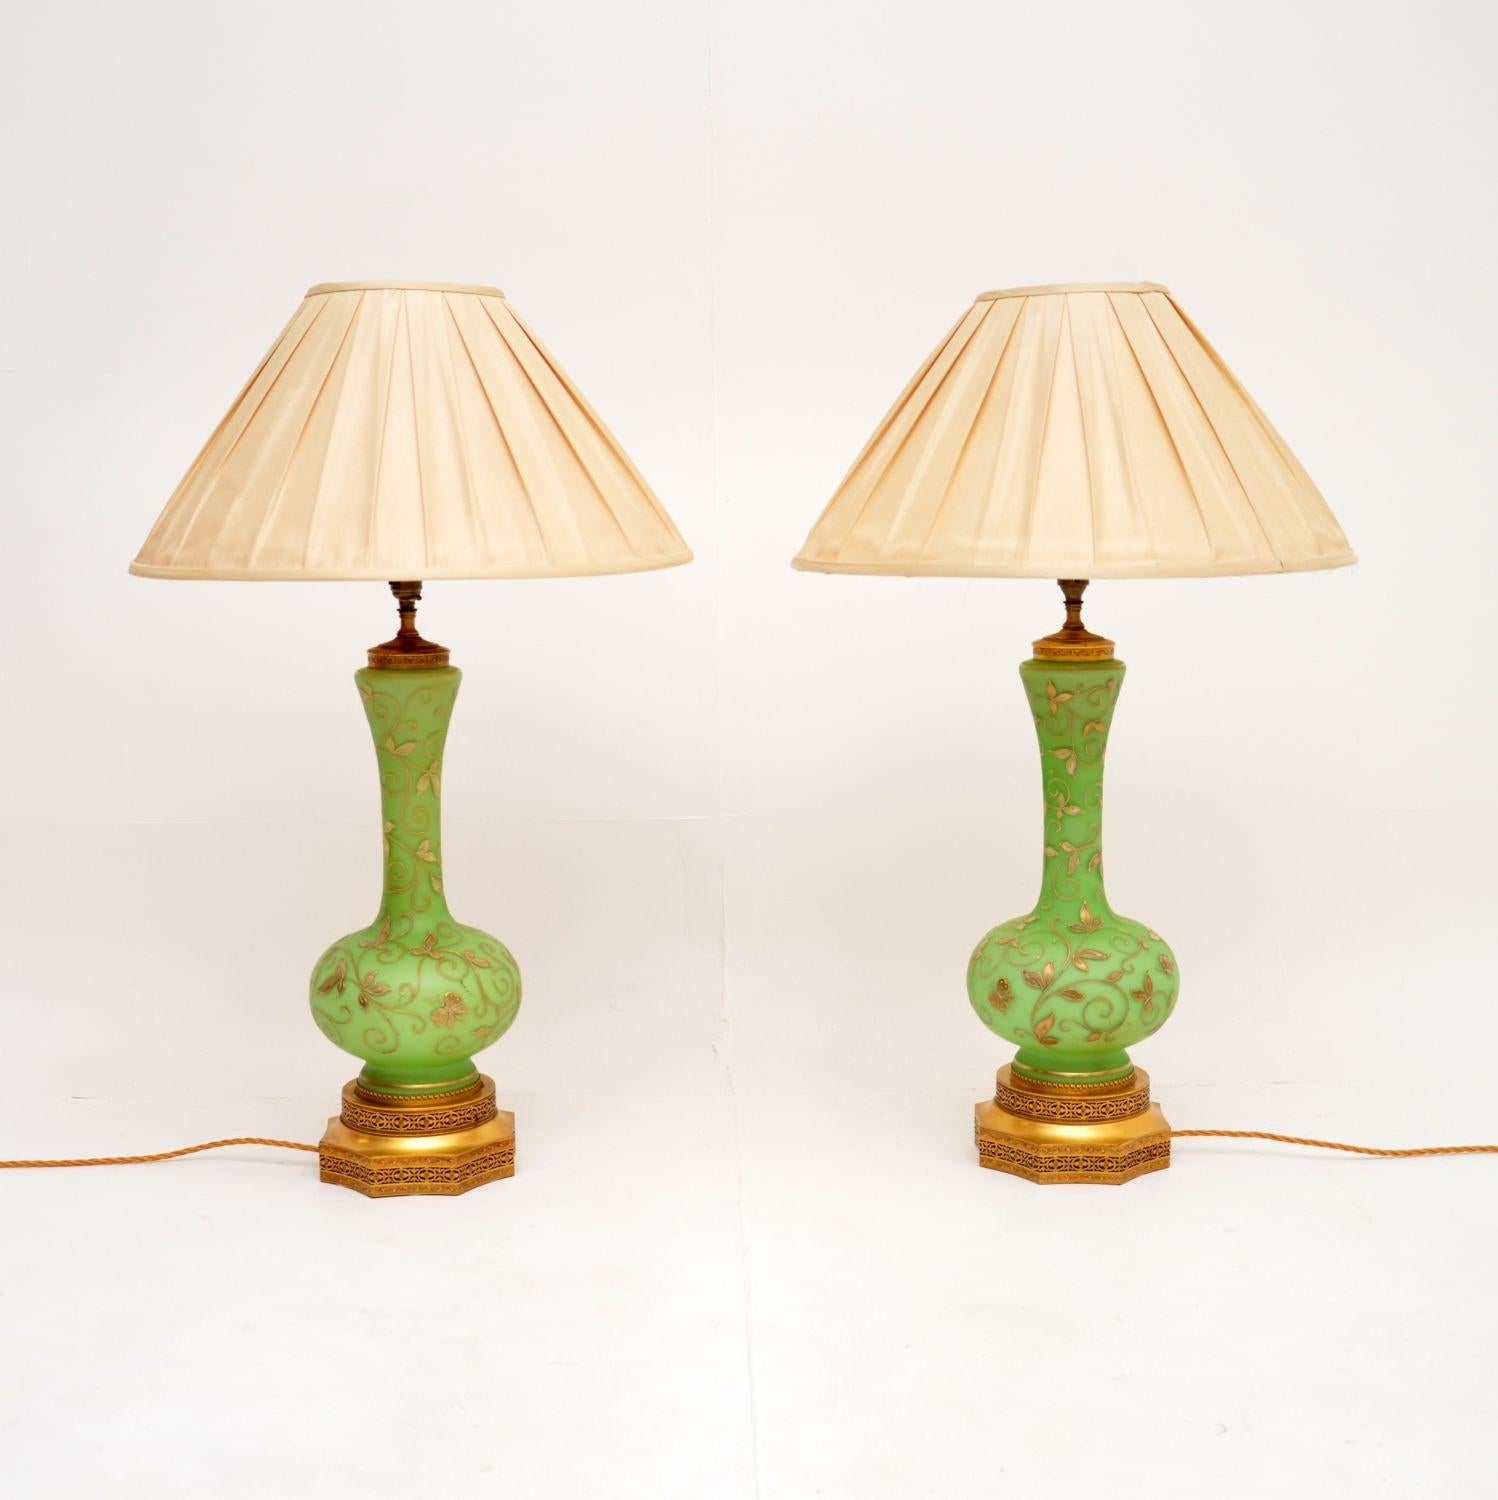 An exquisite pair of antique glass & gilt metal table lamps in stunning green glass. They were made in England, they date from around the 1890-1900 period.

The quality is outstanding, the green glass has the most beautiful colour tone and has